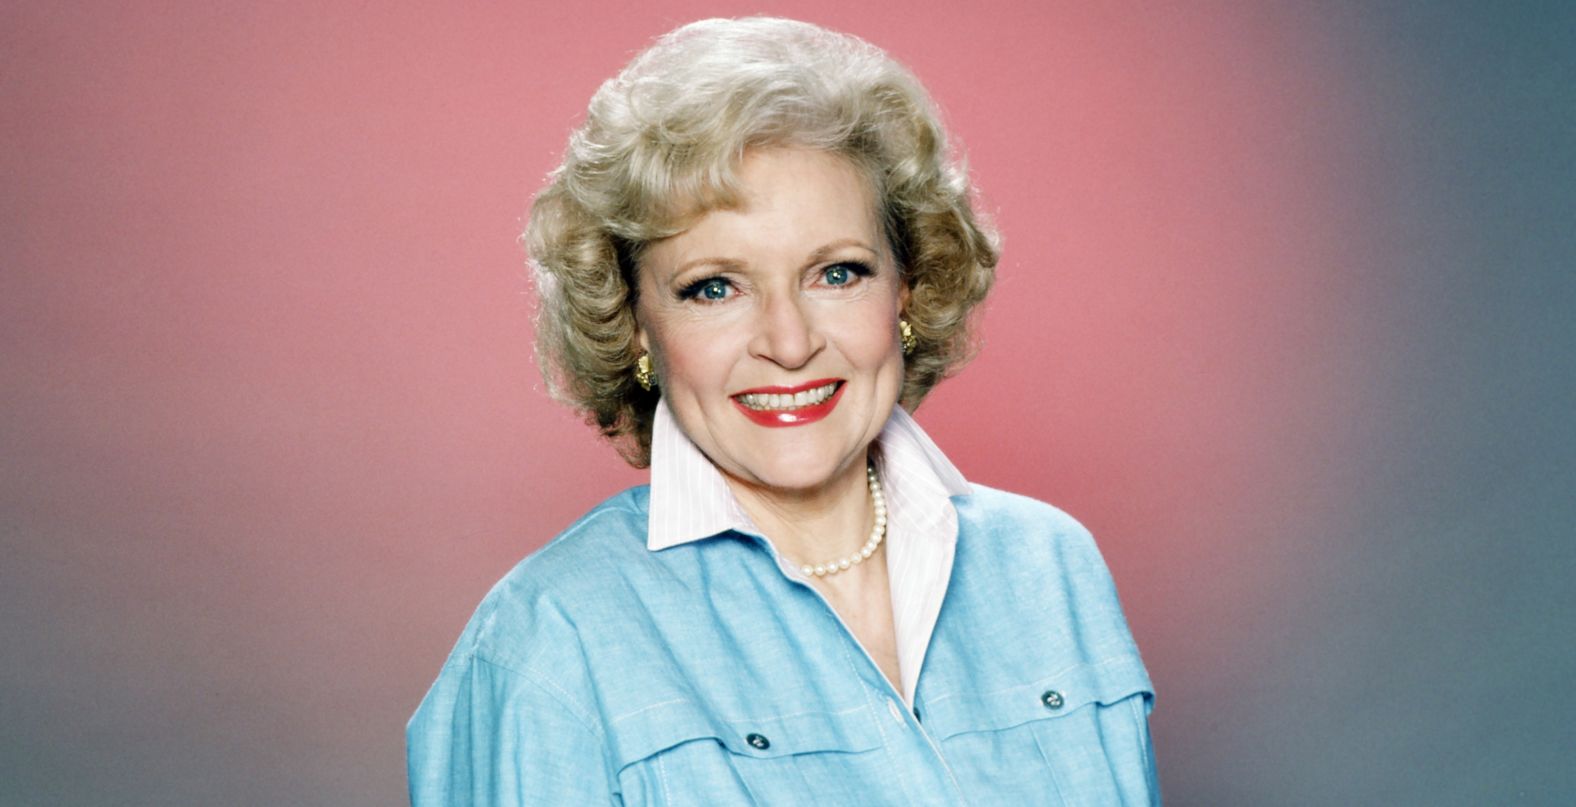 <a href="http://www.cnn.com/2021/12/31/entertainment/betty-white-obituary/index.html" target="_blank">Betty White,</a> a legendary TV star whose career spanned more than eight decades, died Friday, December 31, her longtime agent Jeff Witjas said in a statement to People magazine. She was 99.